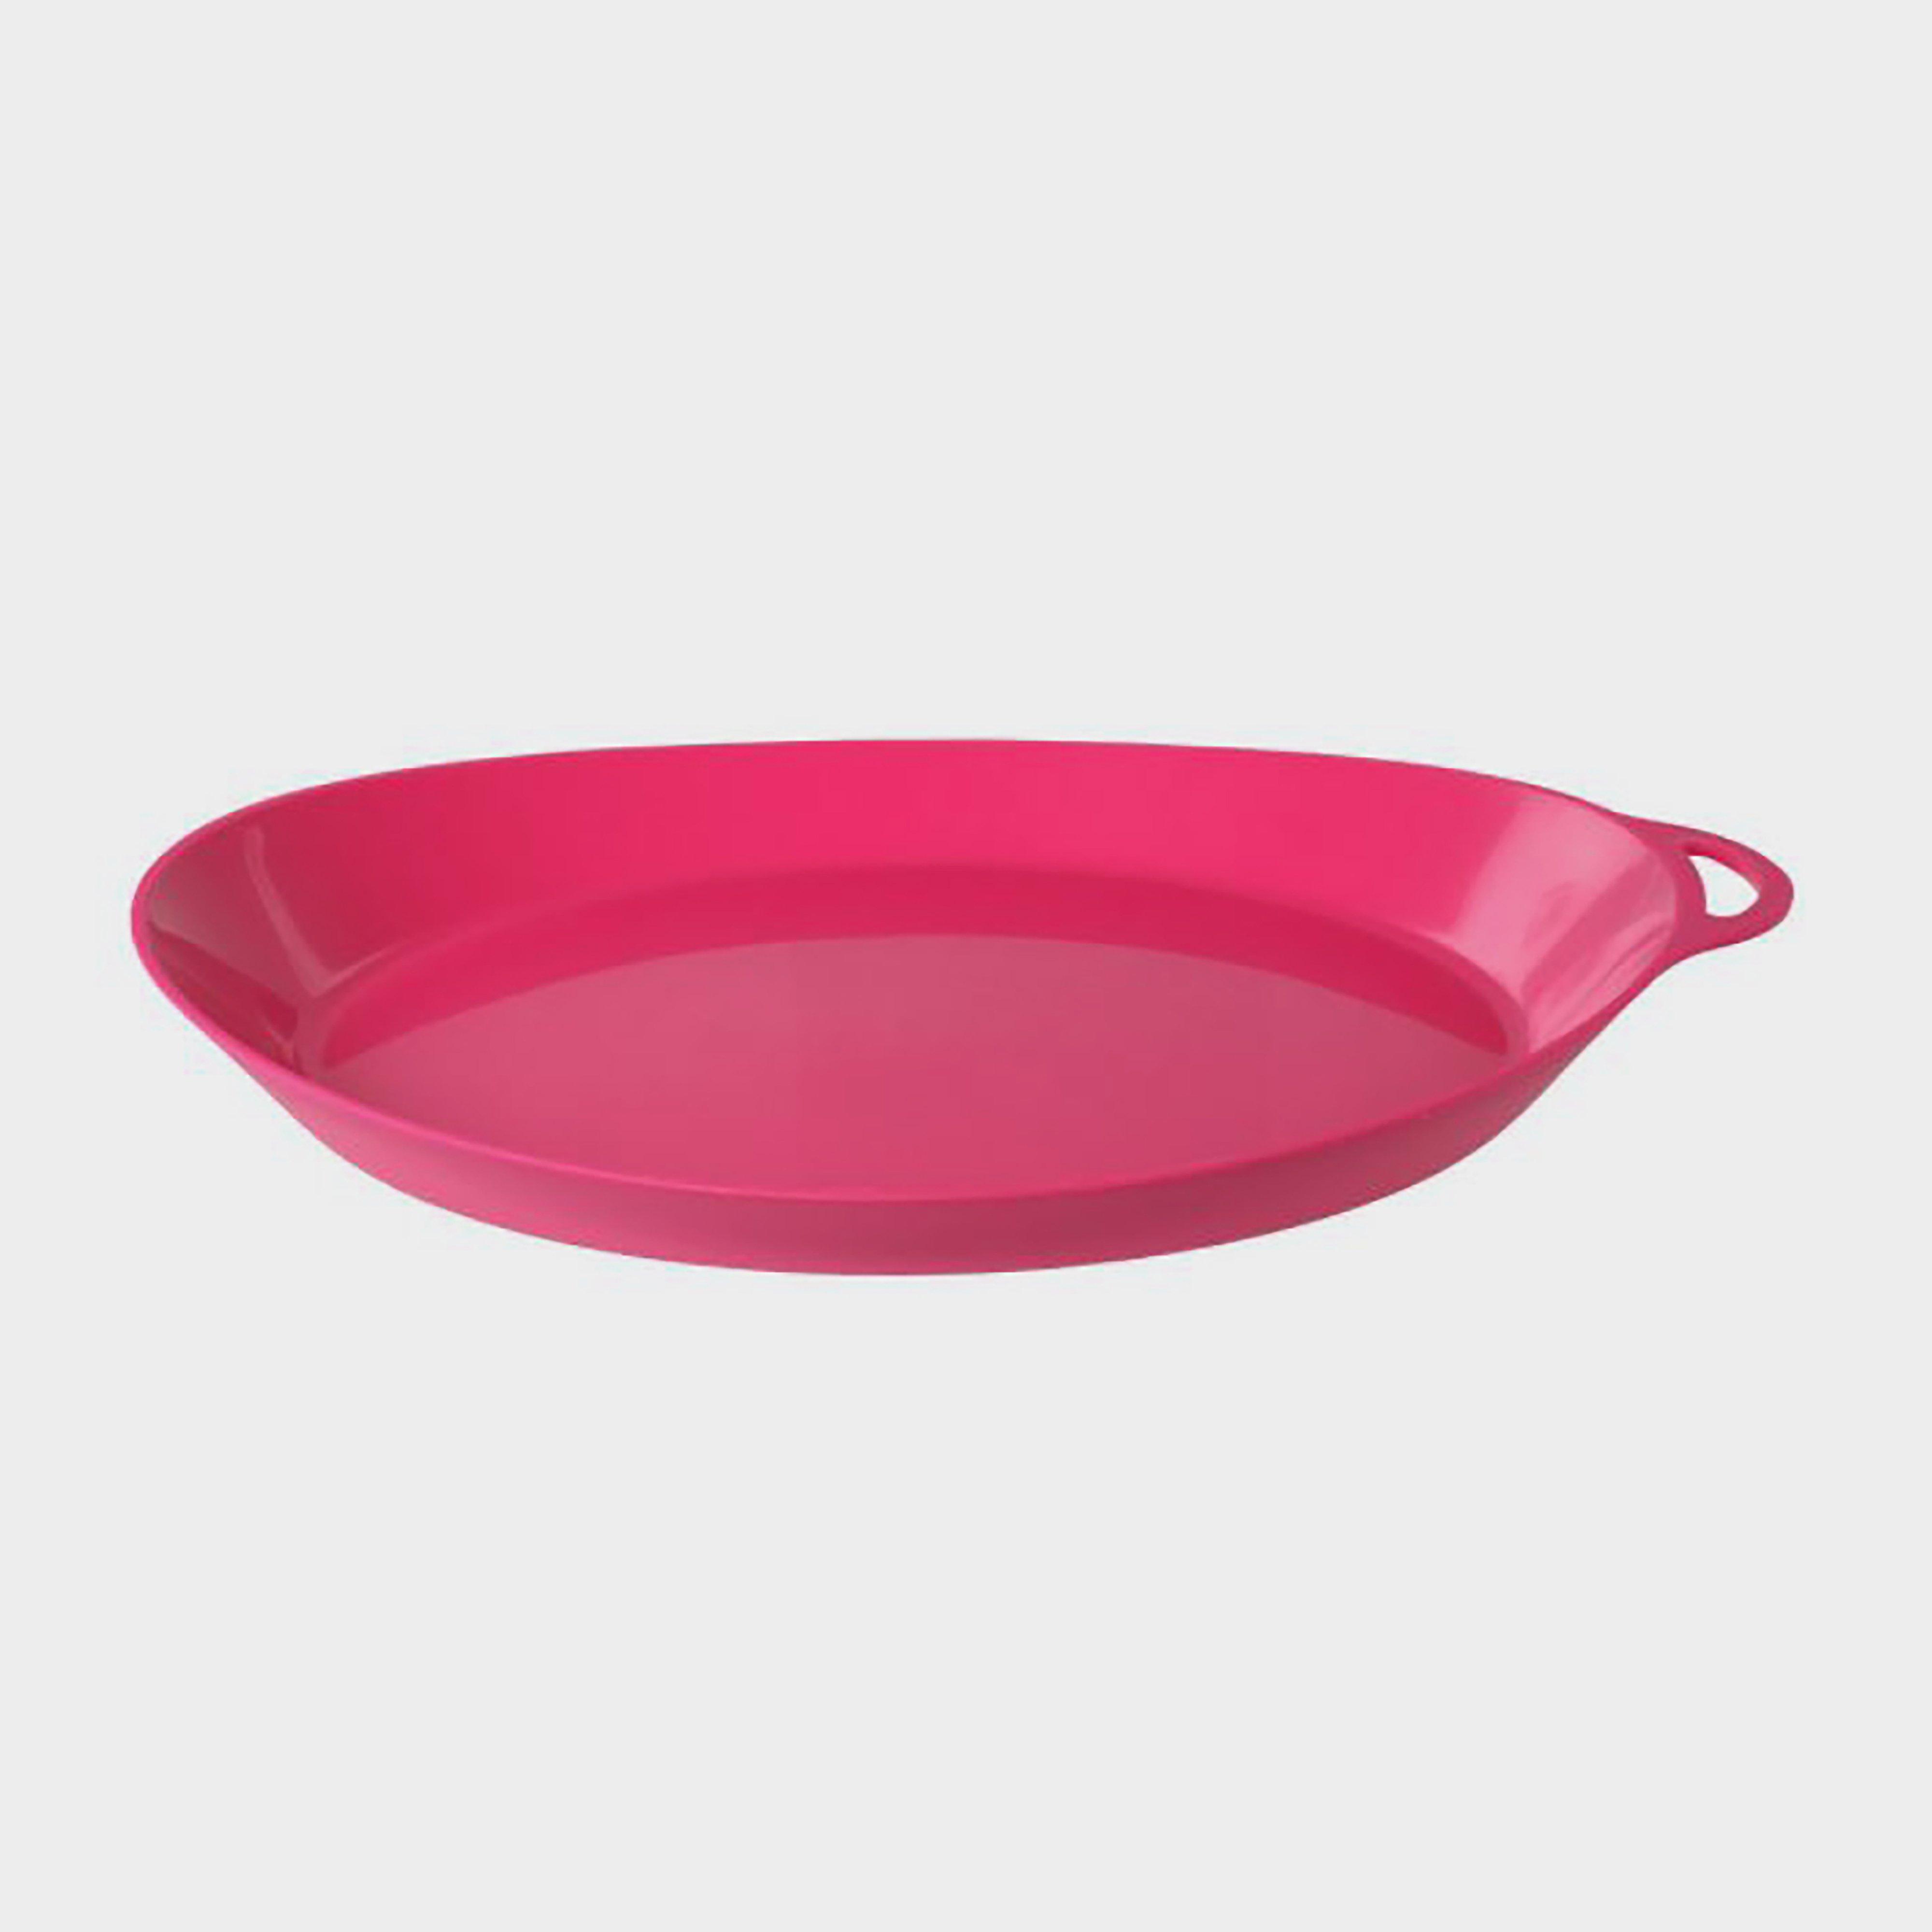 Image of Lifeventure Ellipse Plastic Camping Plate - Pink, Pink